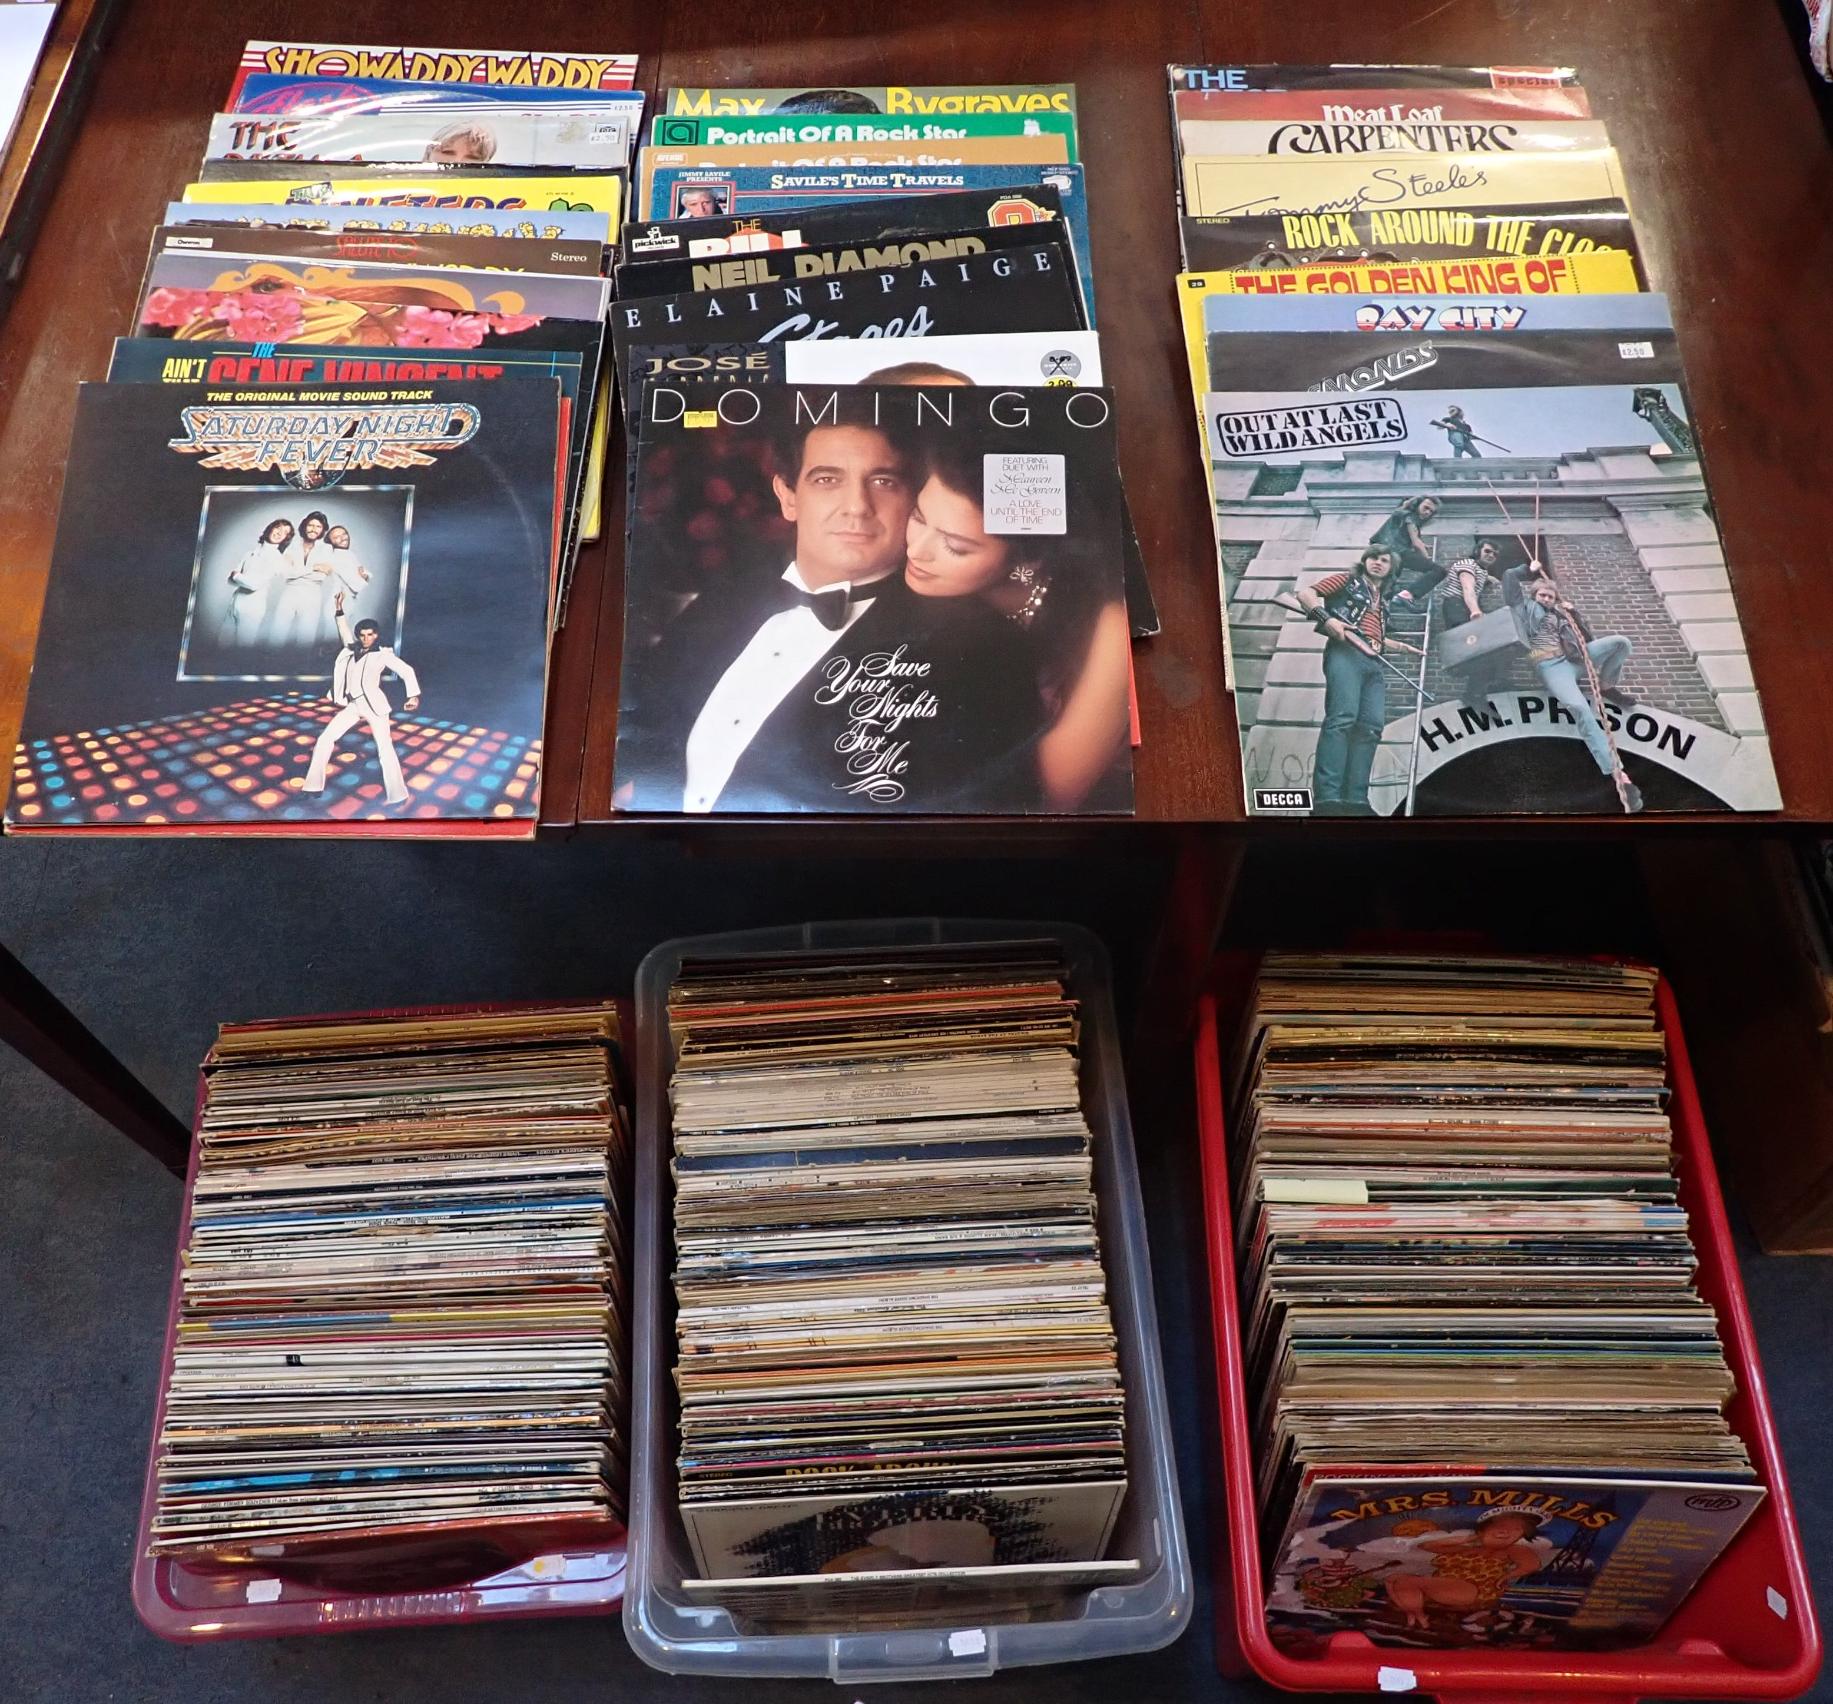 A LARGE COLLECTION OF LP VINYL RECORDS - Image 3 of 4